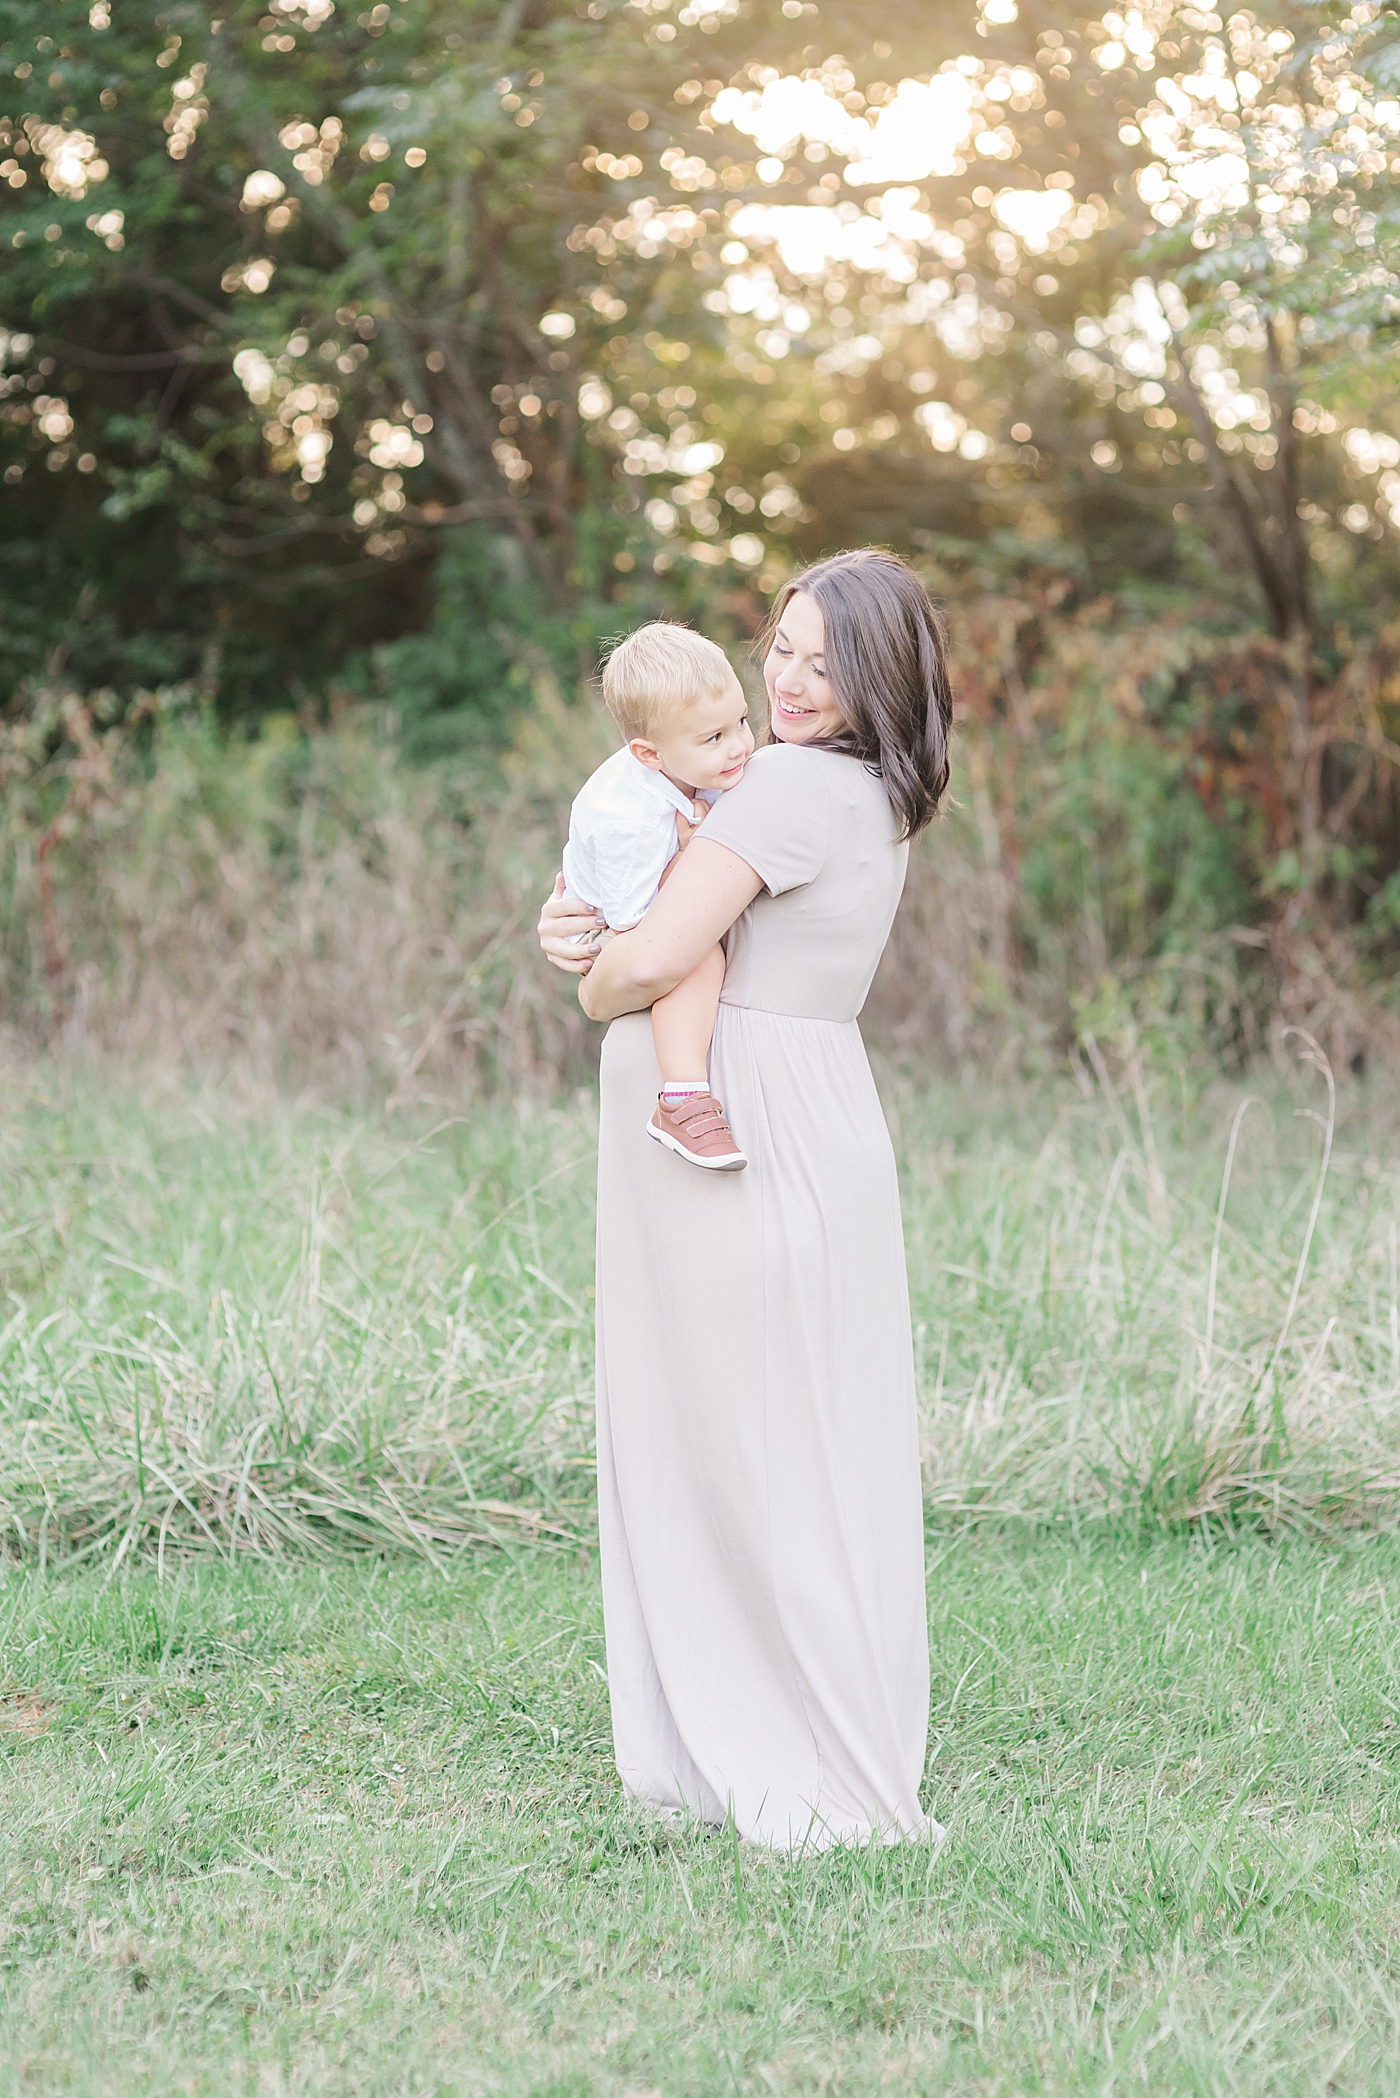 Pregnant mom holding toddler boy | Photo by Anna Wisjo